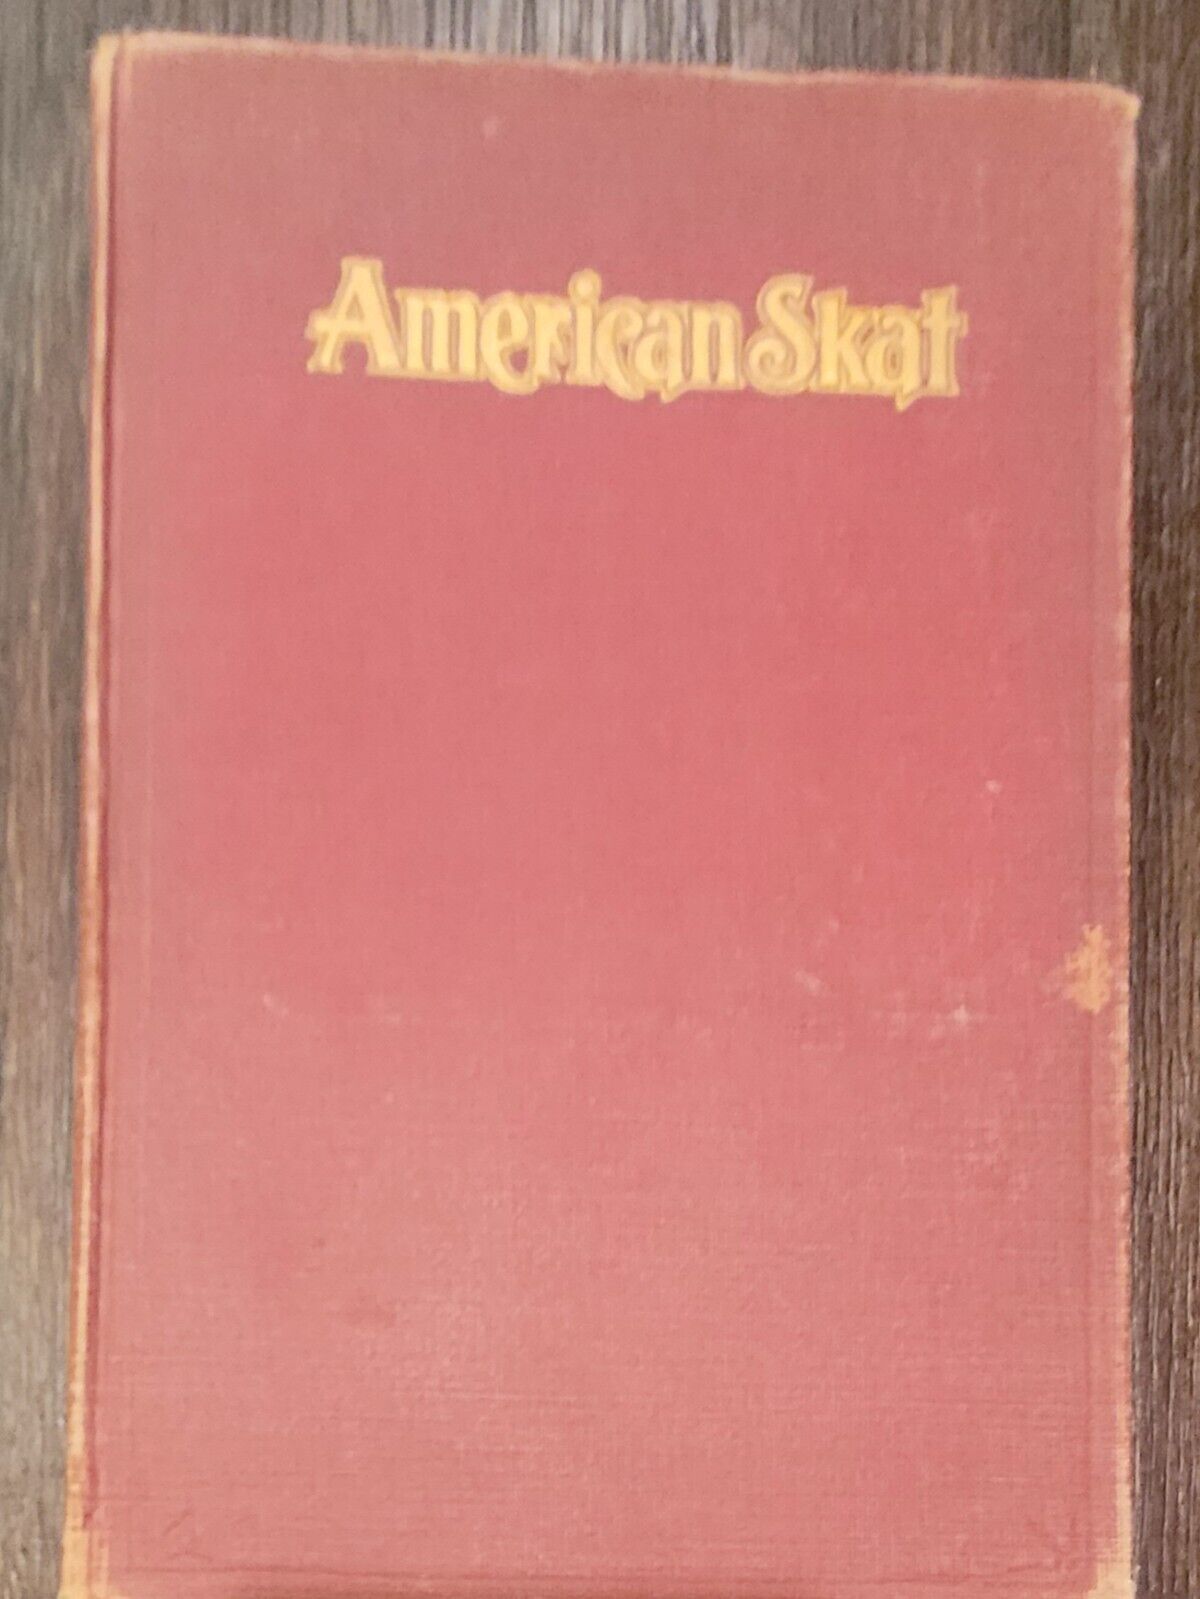 1908 American Skat Or, the Game of Skat Defined by J Charles Eichhorn HC good C.